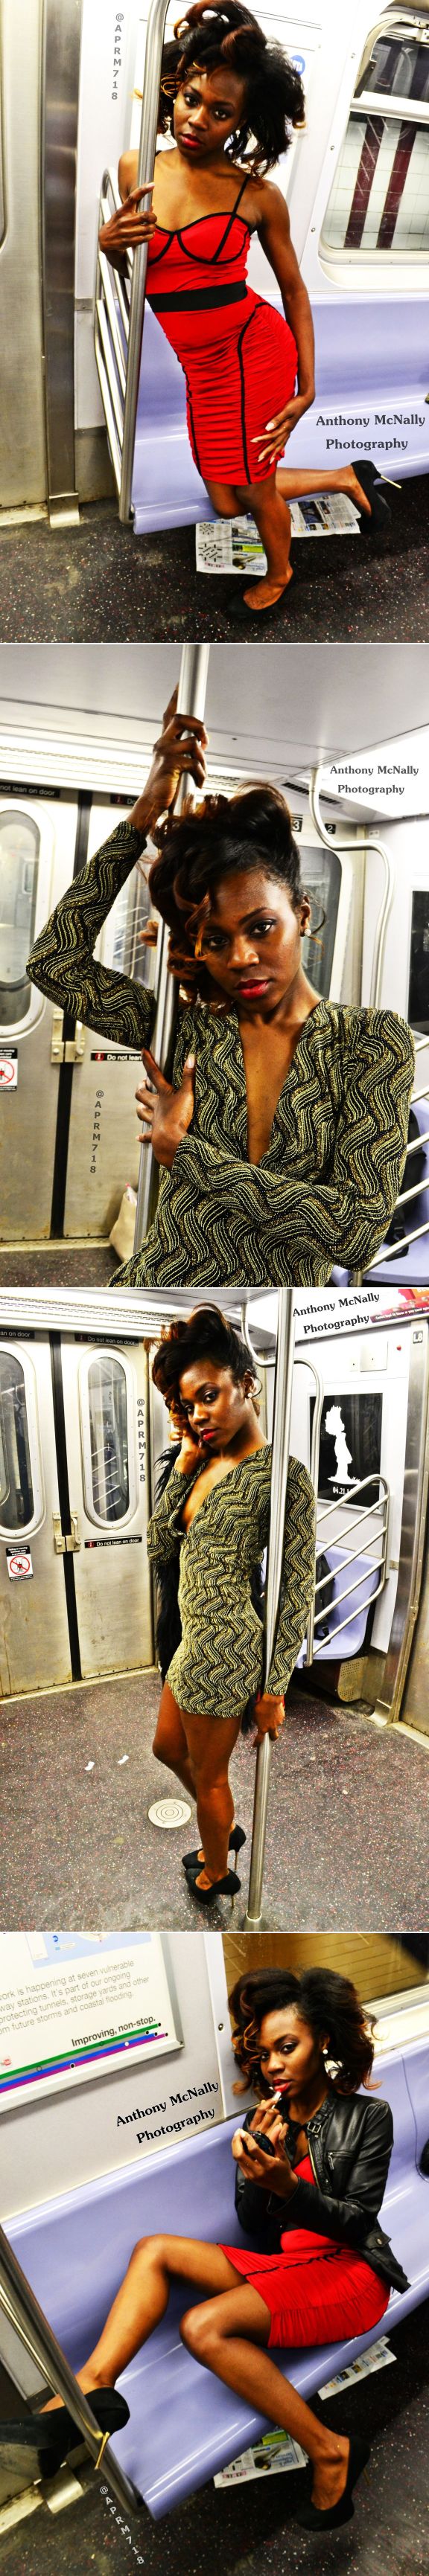 Male and Female model photo shoot of Anthony McNally  and TaijahShanee in NYC Train